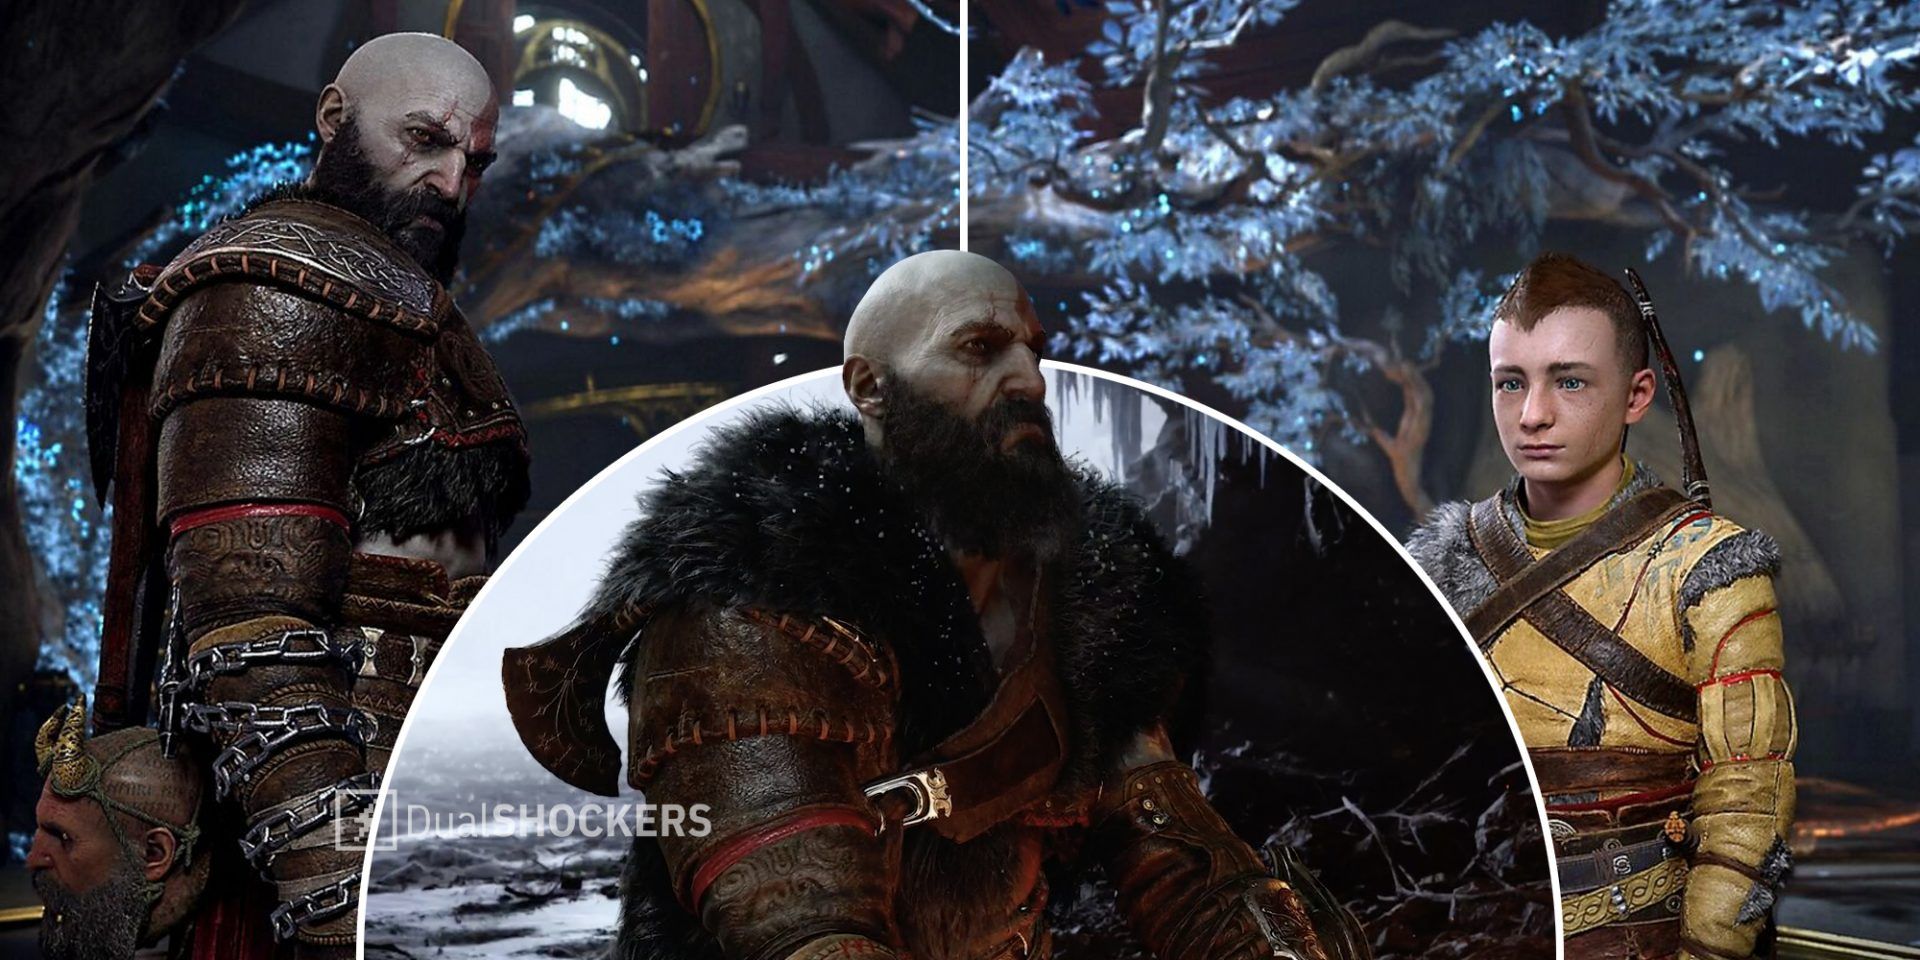 God of War Ragnarok Kratos on left, Kratos with weapon in middle, Atreus on right